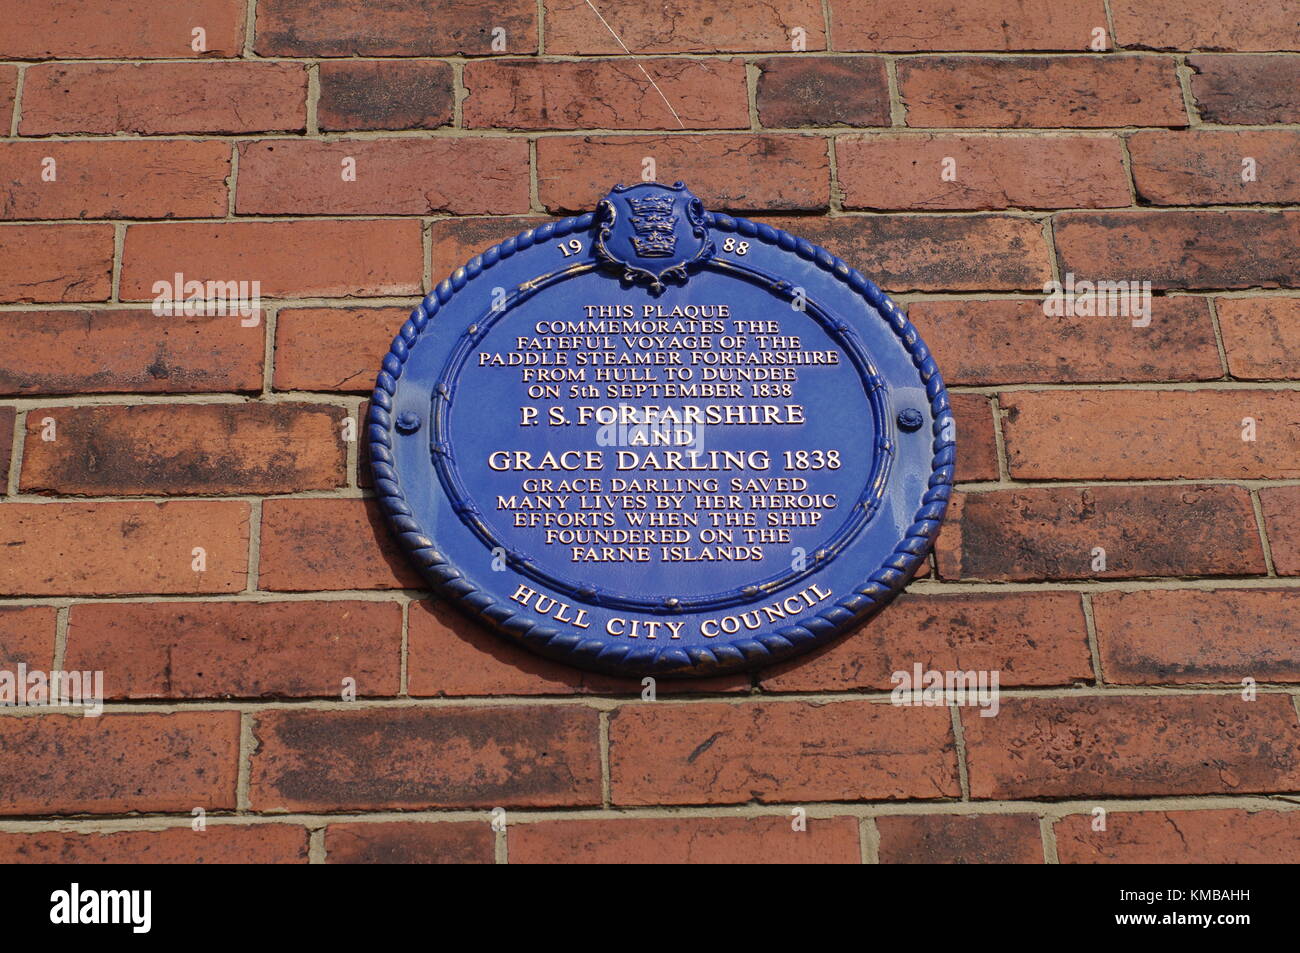 Blue plaque commemorating the voyage of the Paddle Steamer Forfarshire between Hull and Dundee from which the heroine Grace Darling rescued many Stock Photo